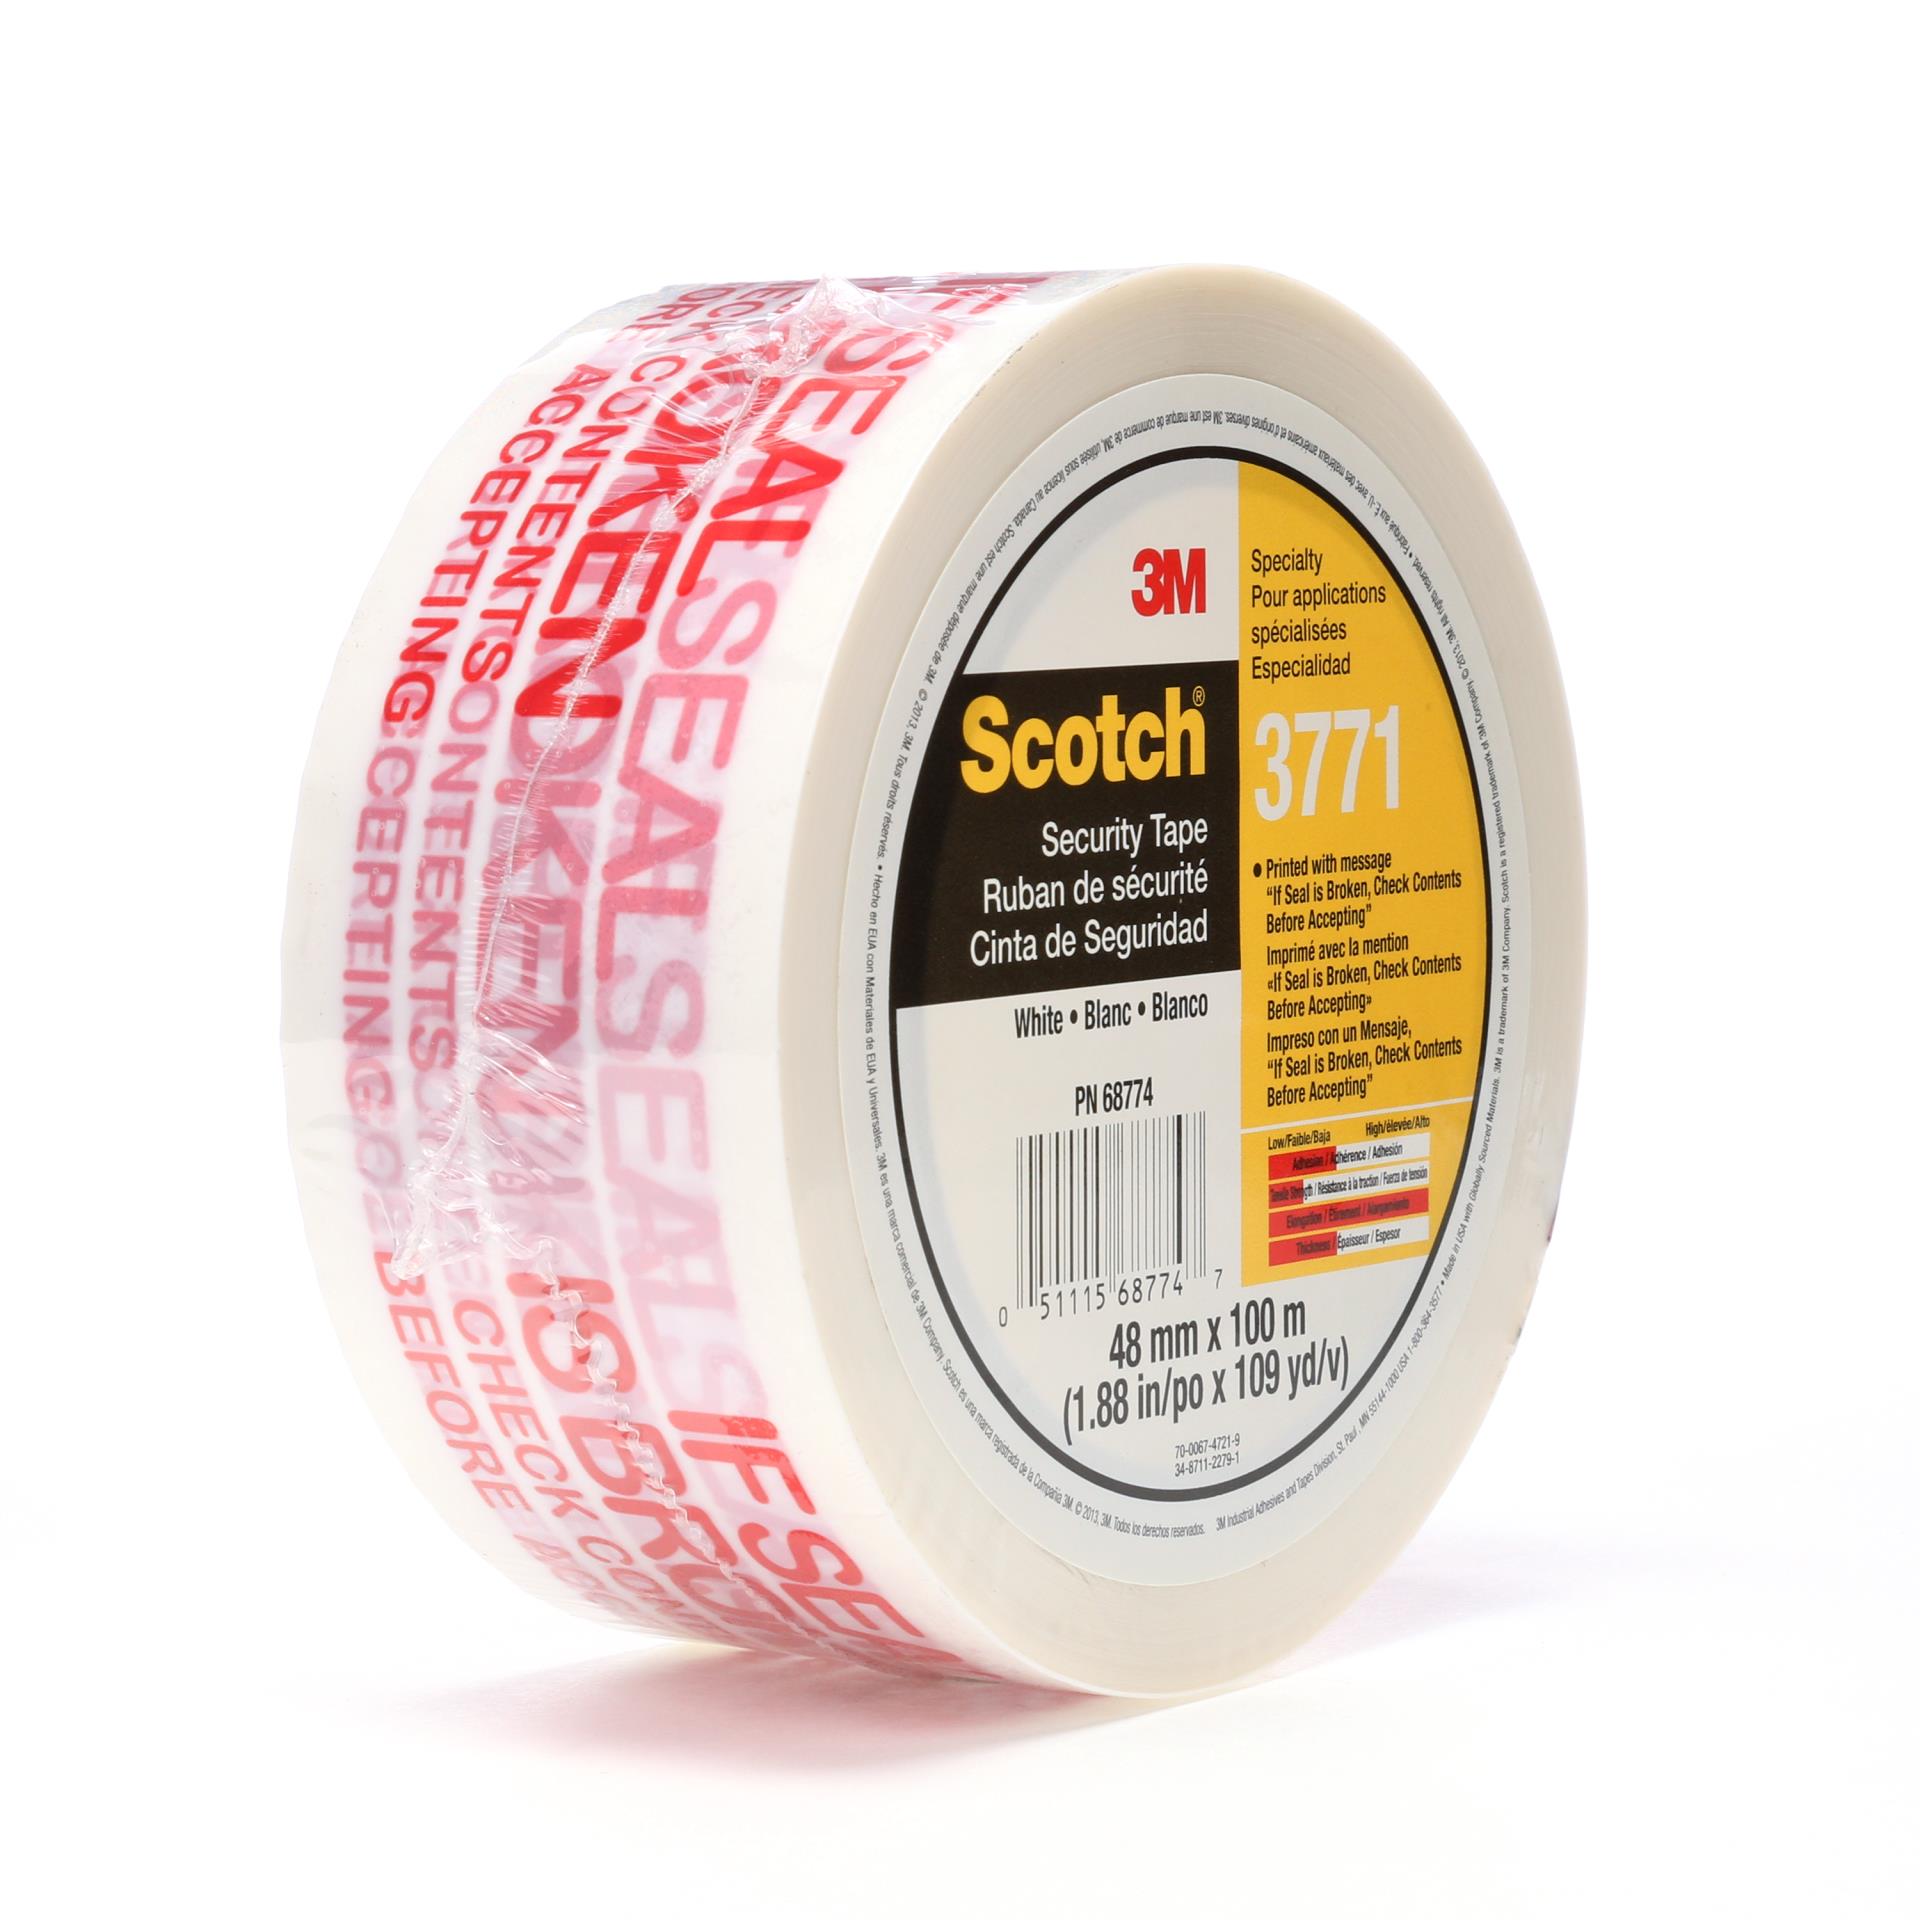 00051115687747 Scotch® Printed Message Box Sealing Tape 3771, White, 48  mm x 100 m, 36/case (6 rolls/pack packs/case), Conveniently Packaged  Aircraft products 3M 9371311